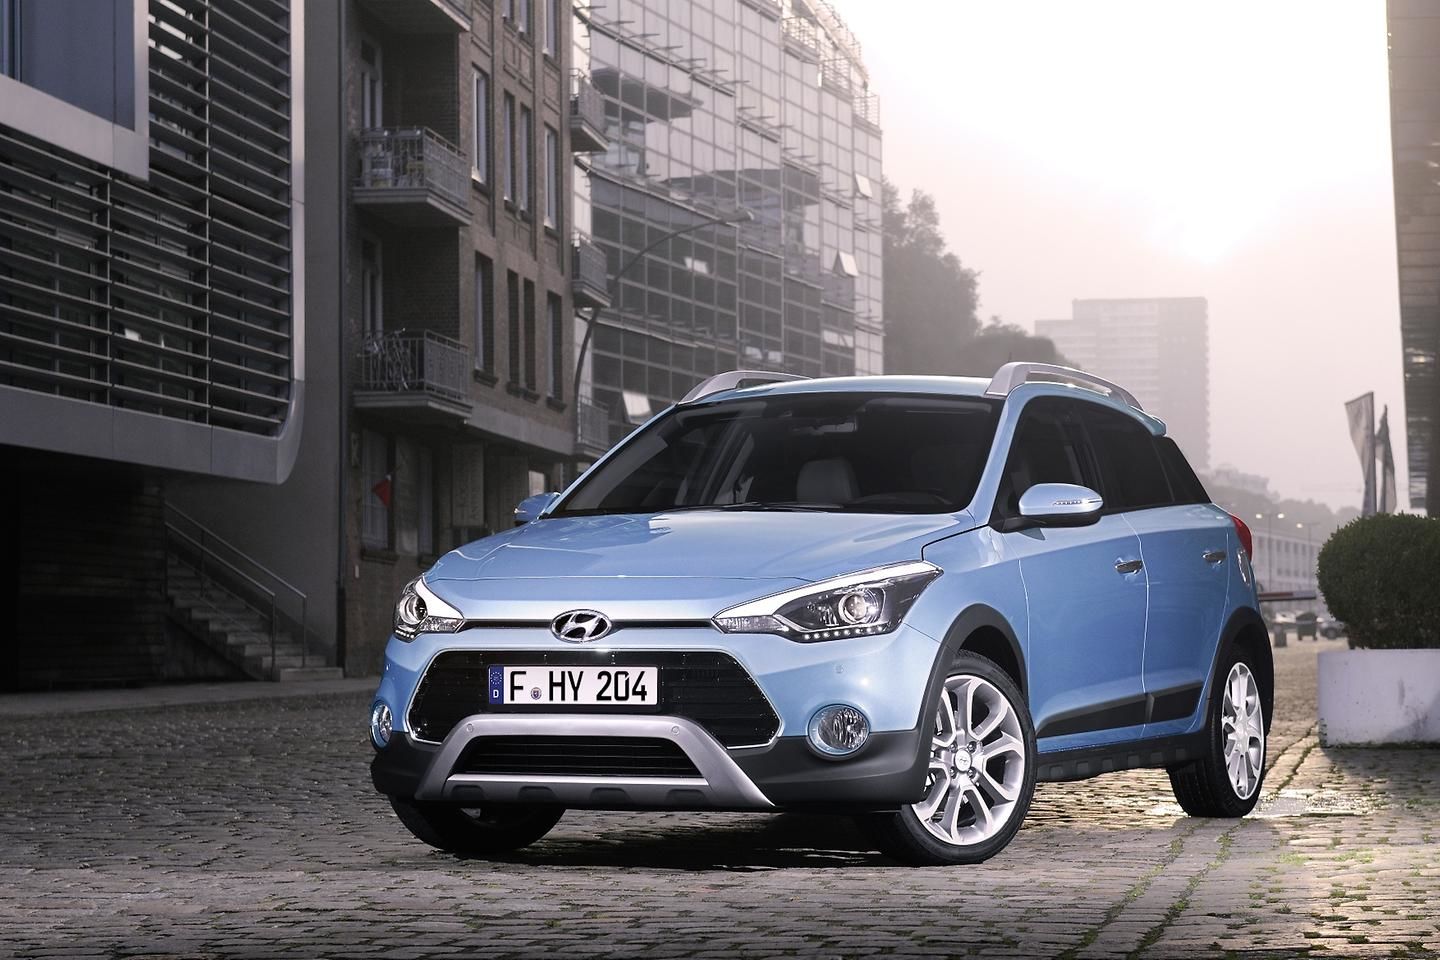 Hyundai Motor Introduces Two New Models to Youngest Ever Range